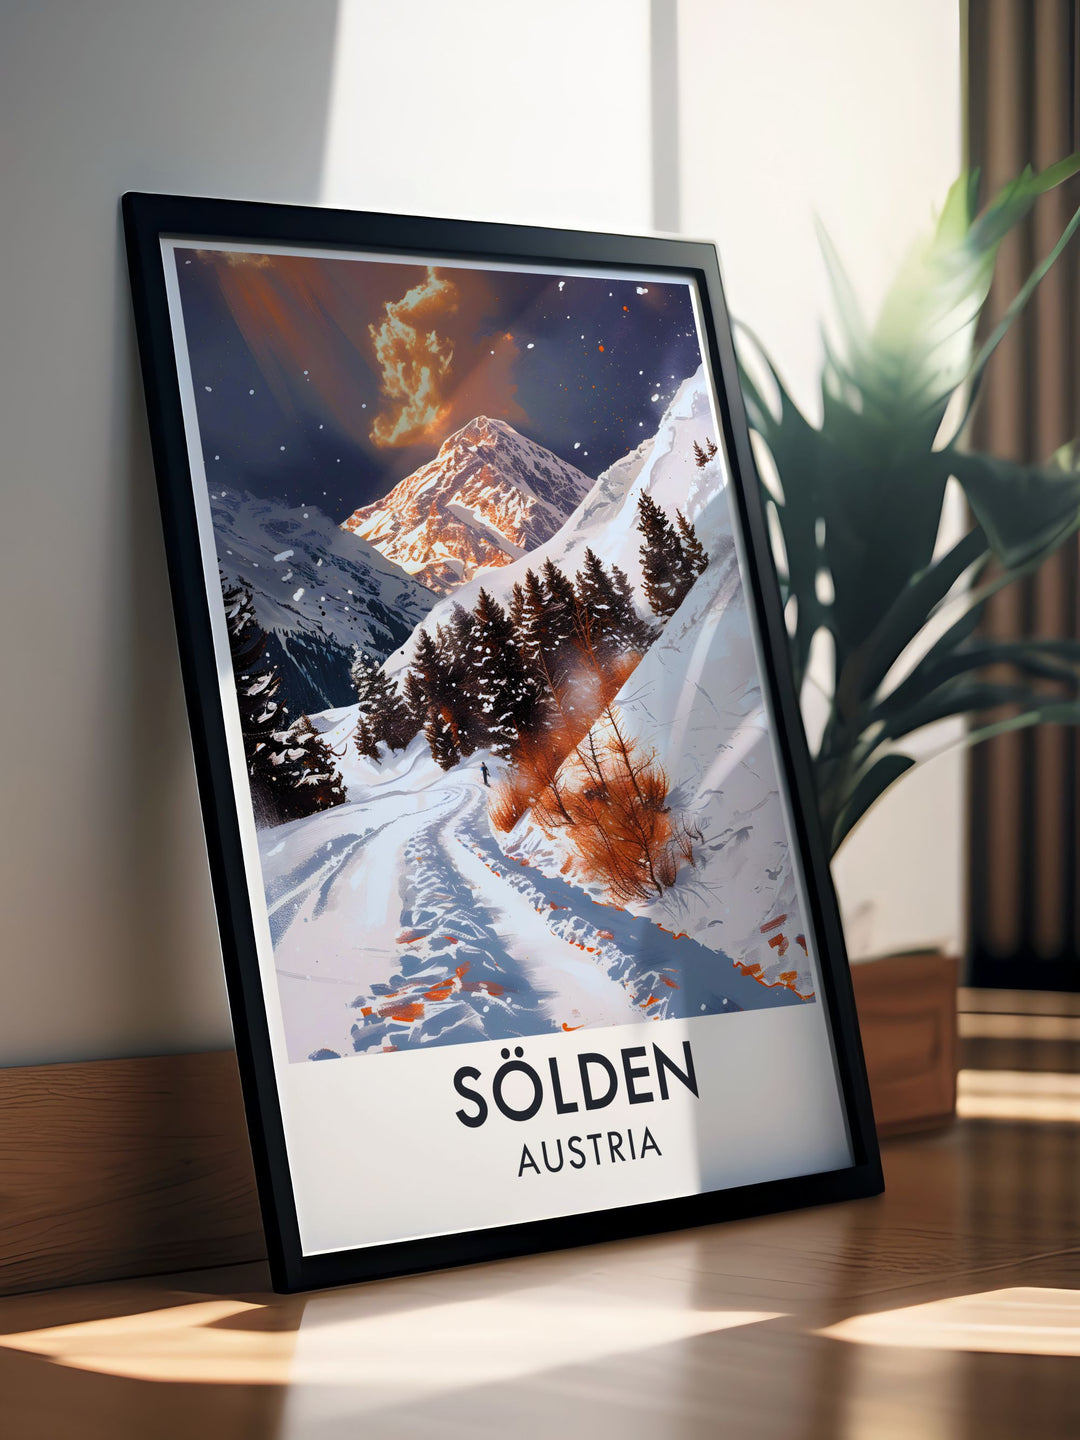 The majestic mountains and pristine slopes of Solden are highlighted in this vibrant travel poster, showcasing the natural beauty and thrilling winter sports opportunities of the Austrian Alps.